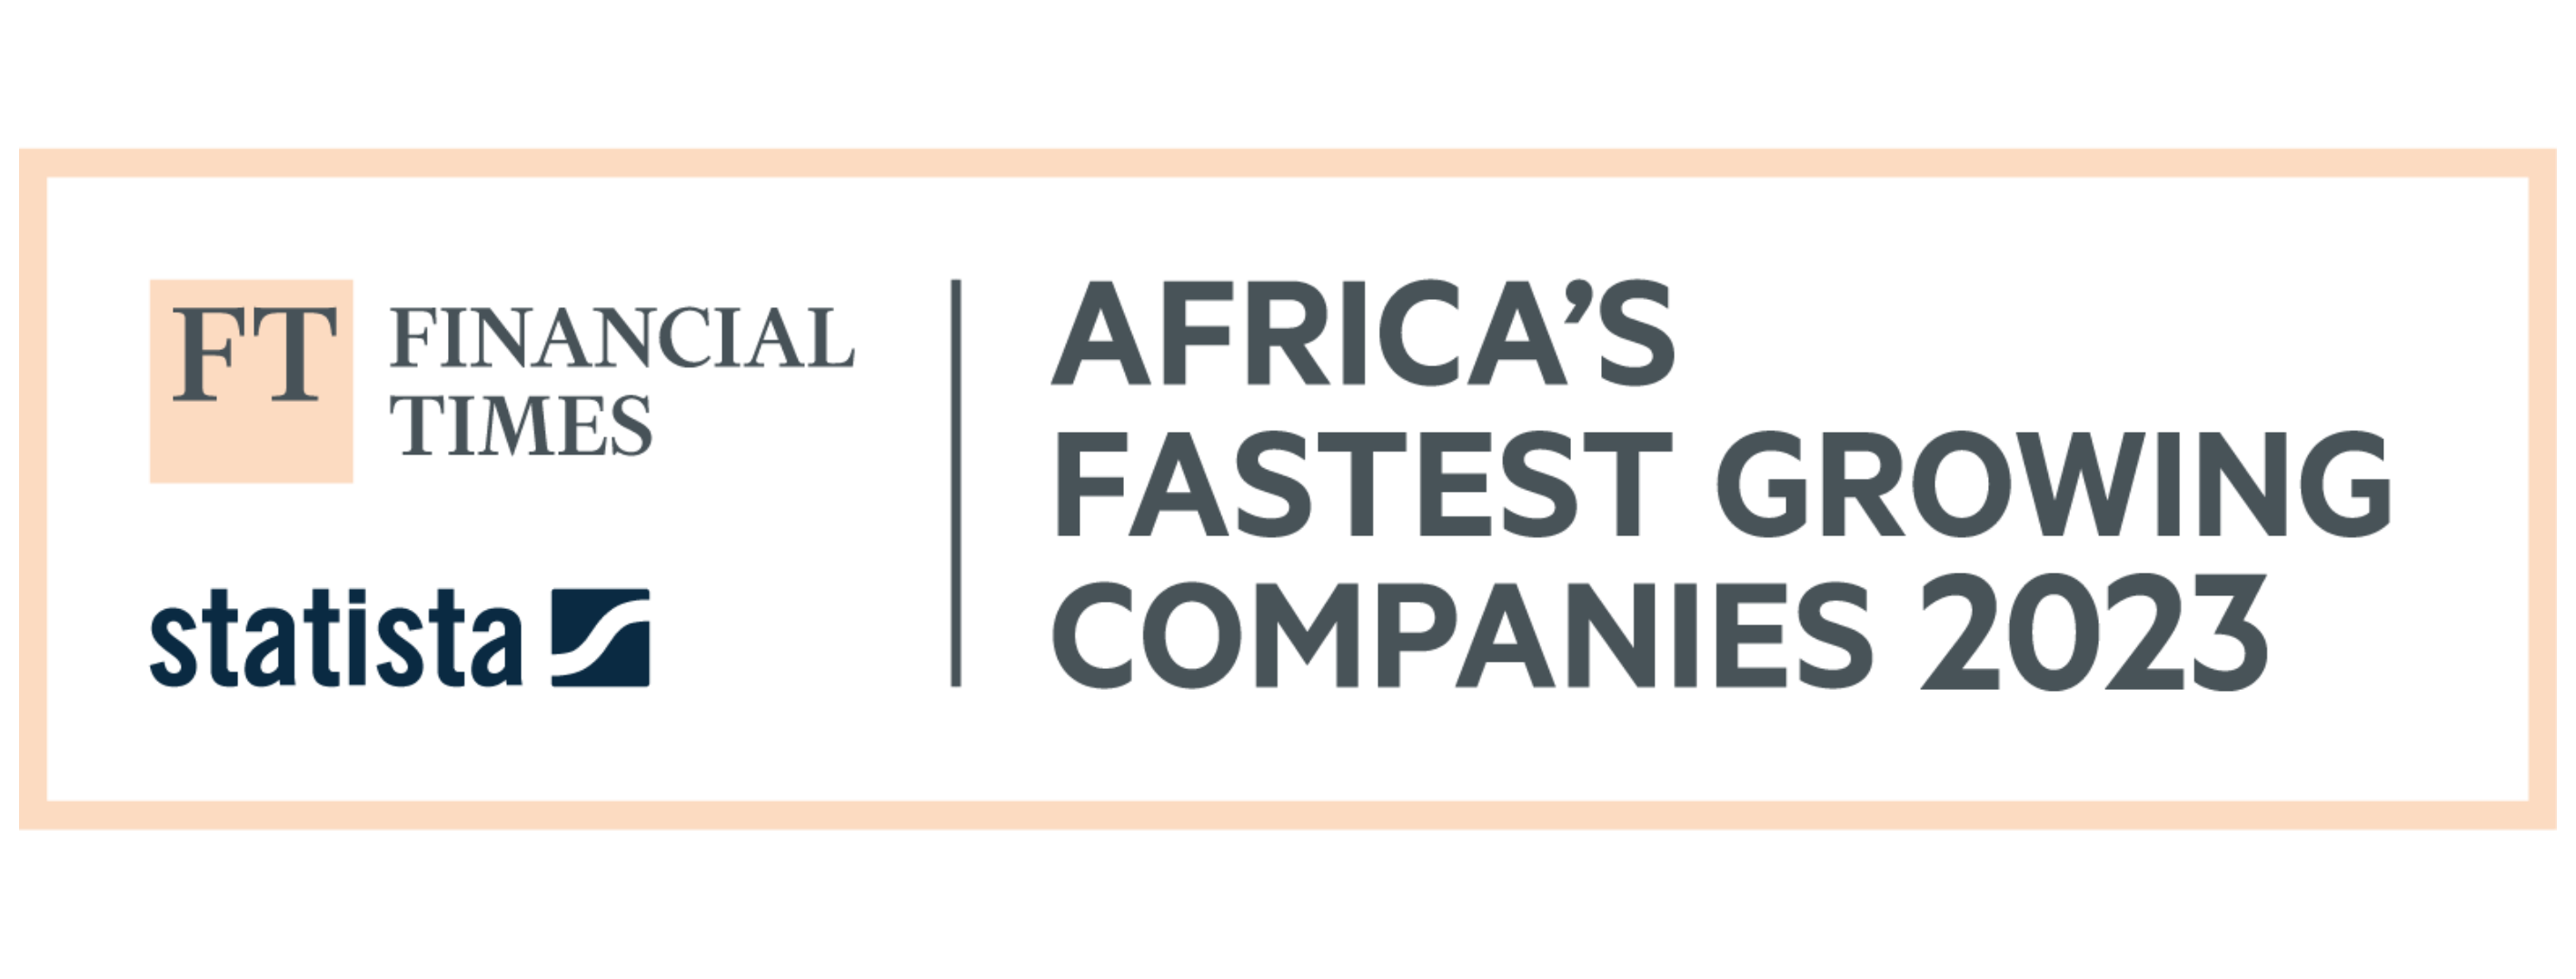 hearX Group listed among the Top 50 fastest growing companies in Africa for a second year.